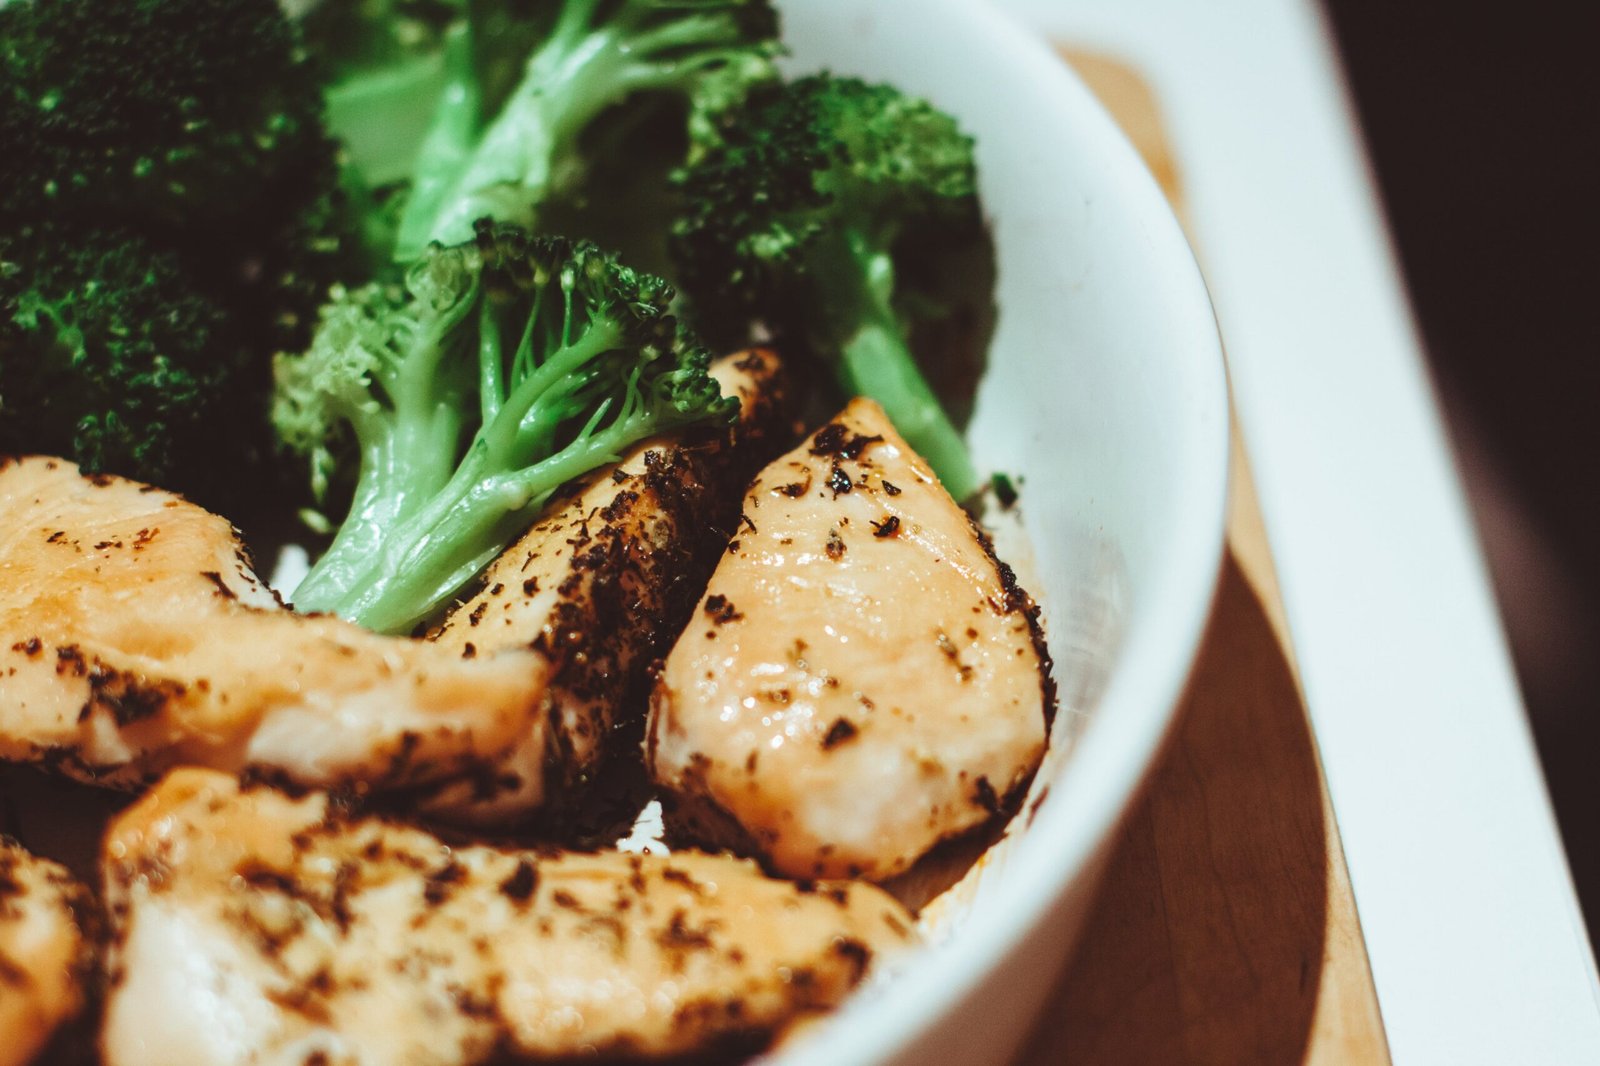 High Protein Post-Gym Meal Recipe for Optimal Recovery